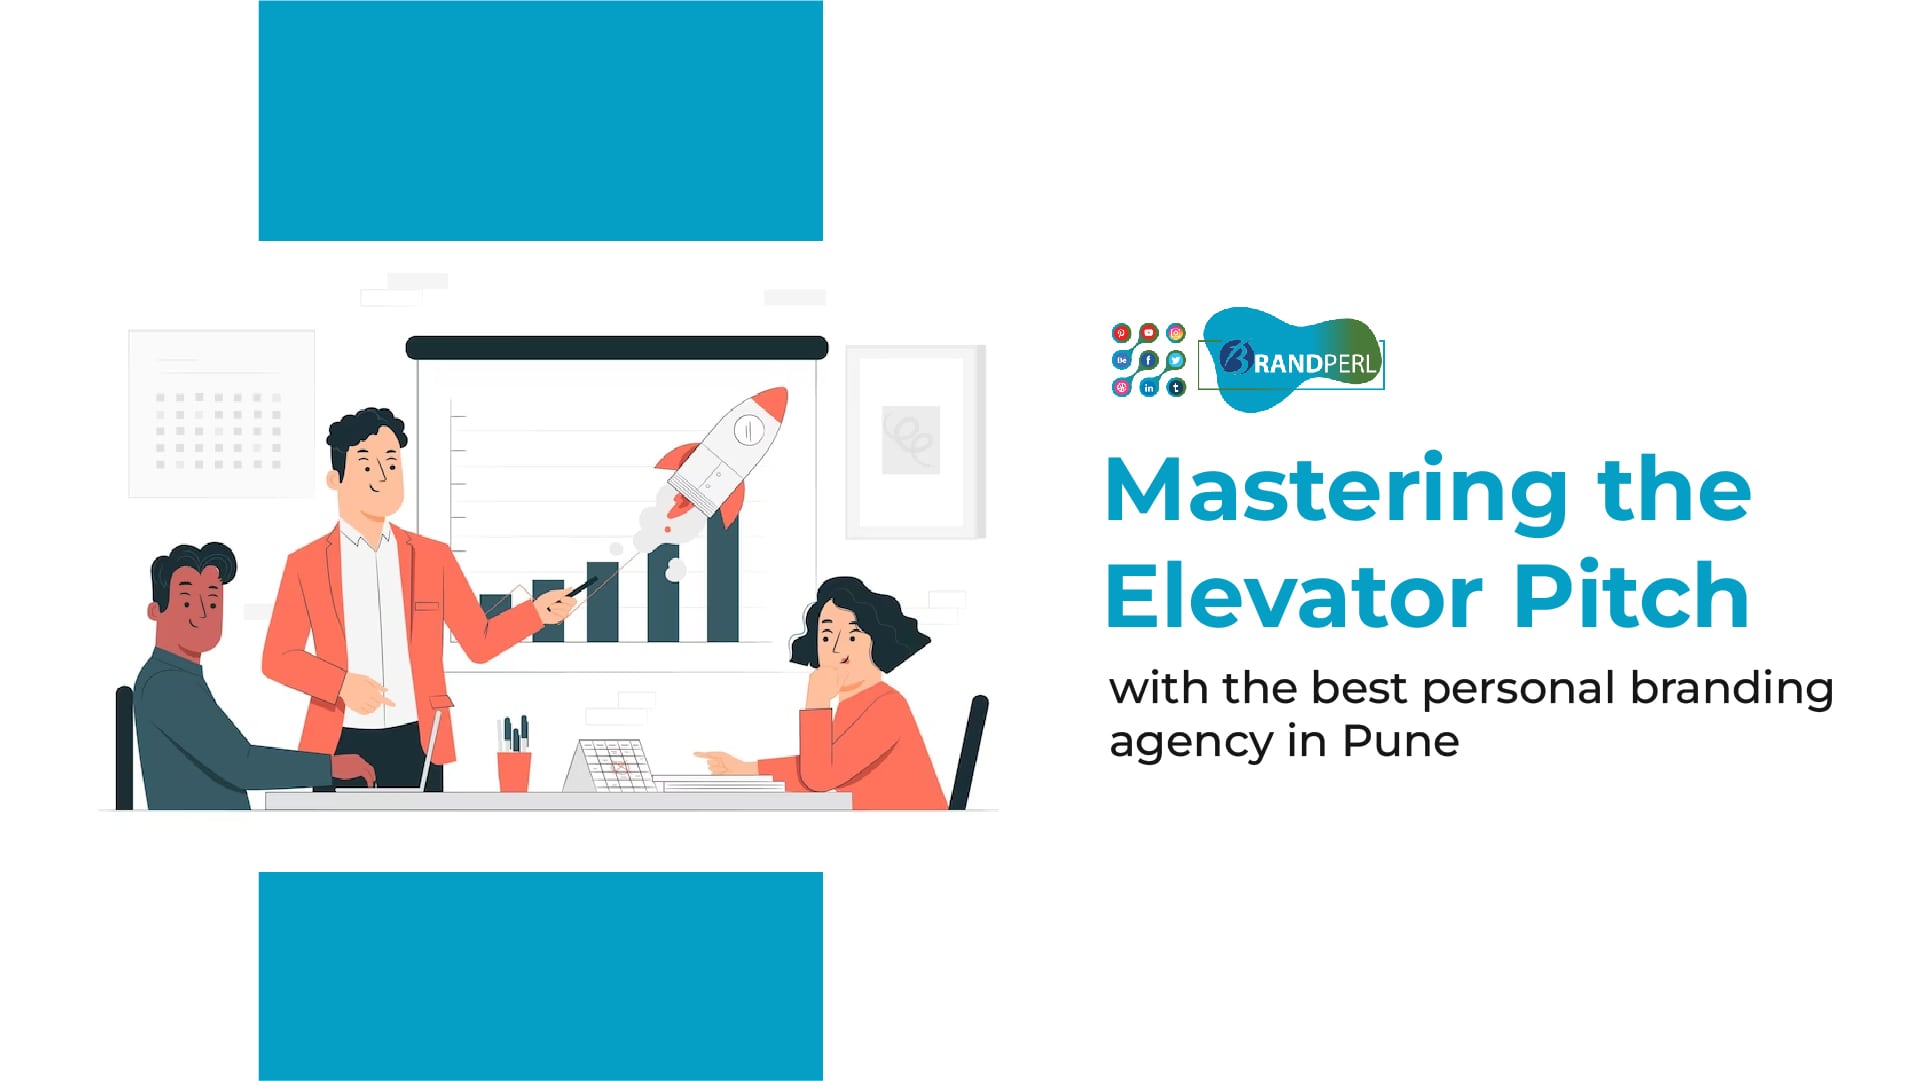 Mastering the Elevator Pitch with the best personal branding agency in Pune